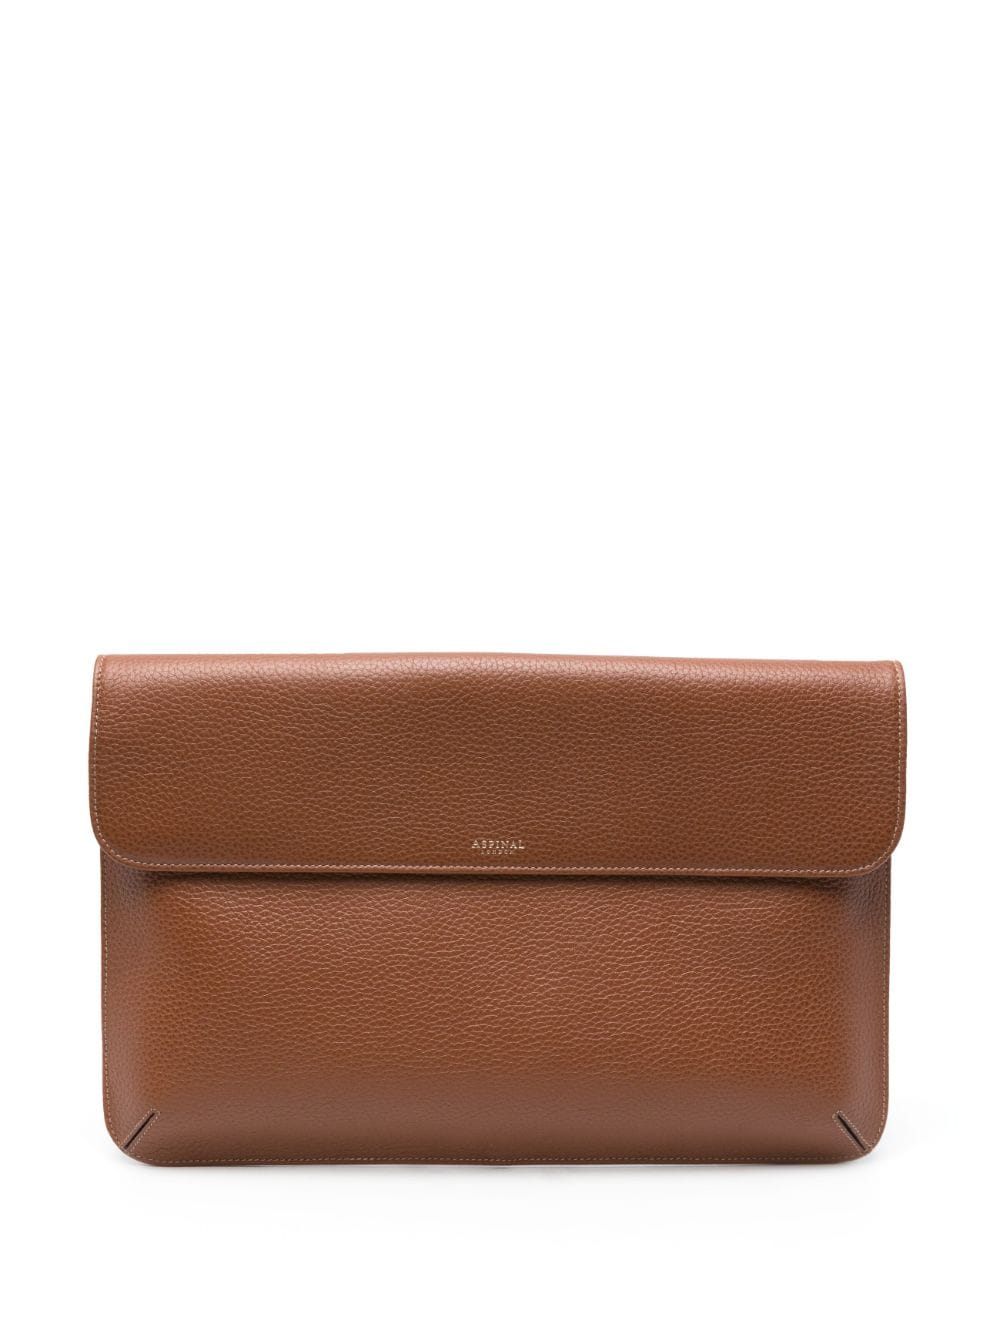 Aspinal Of London pebbled leather laptop bag - Brown von Aspinal Of London